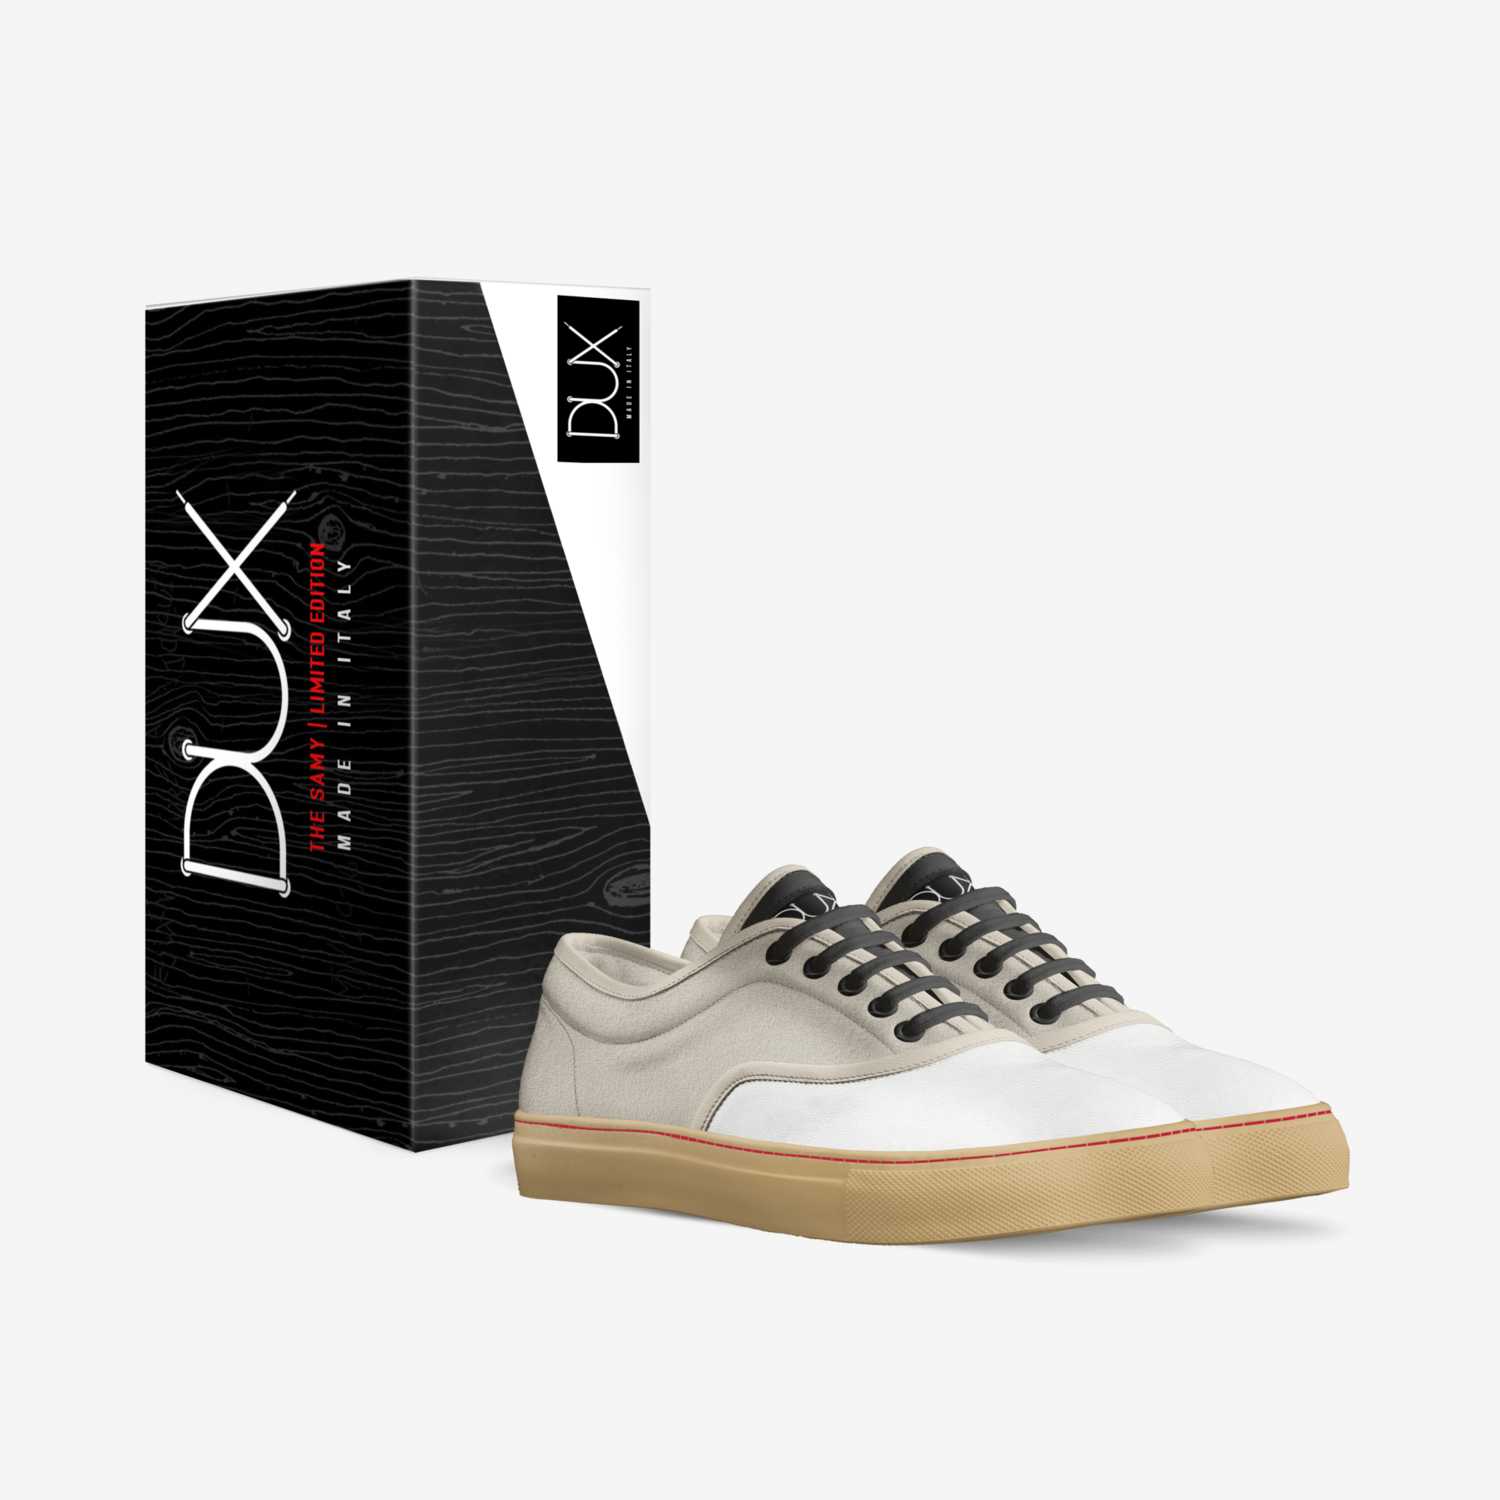 DUX custom made in Italy shoes by Rj Santiago | Box view